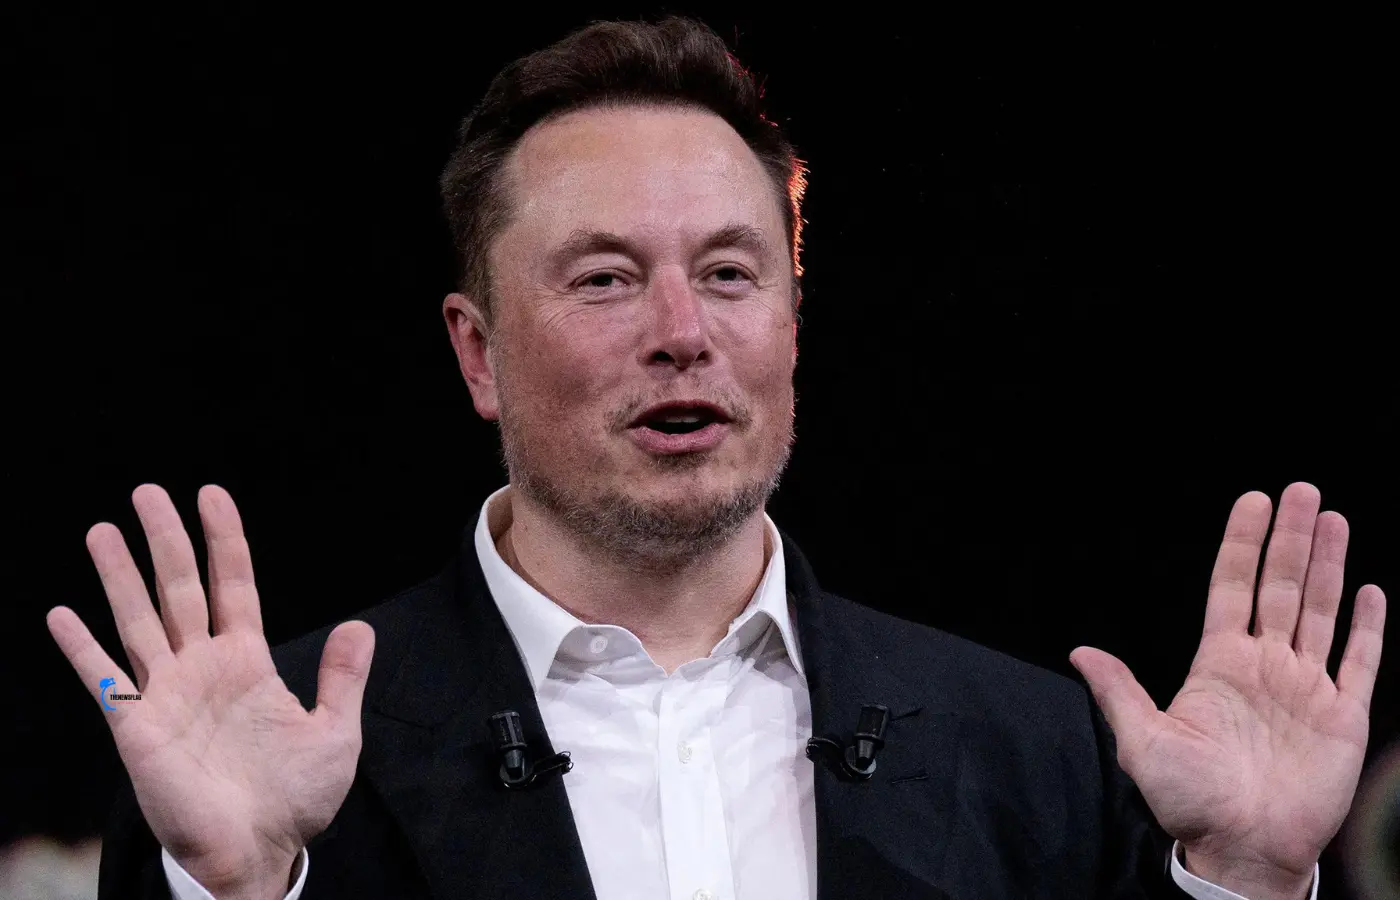 In February, Musk's X banned more than 5 lakh accounts in India due to policy infractions.